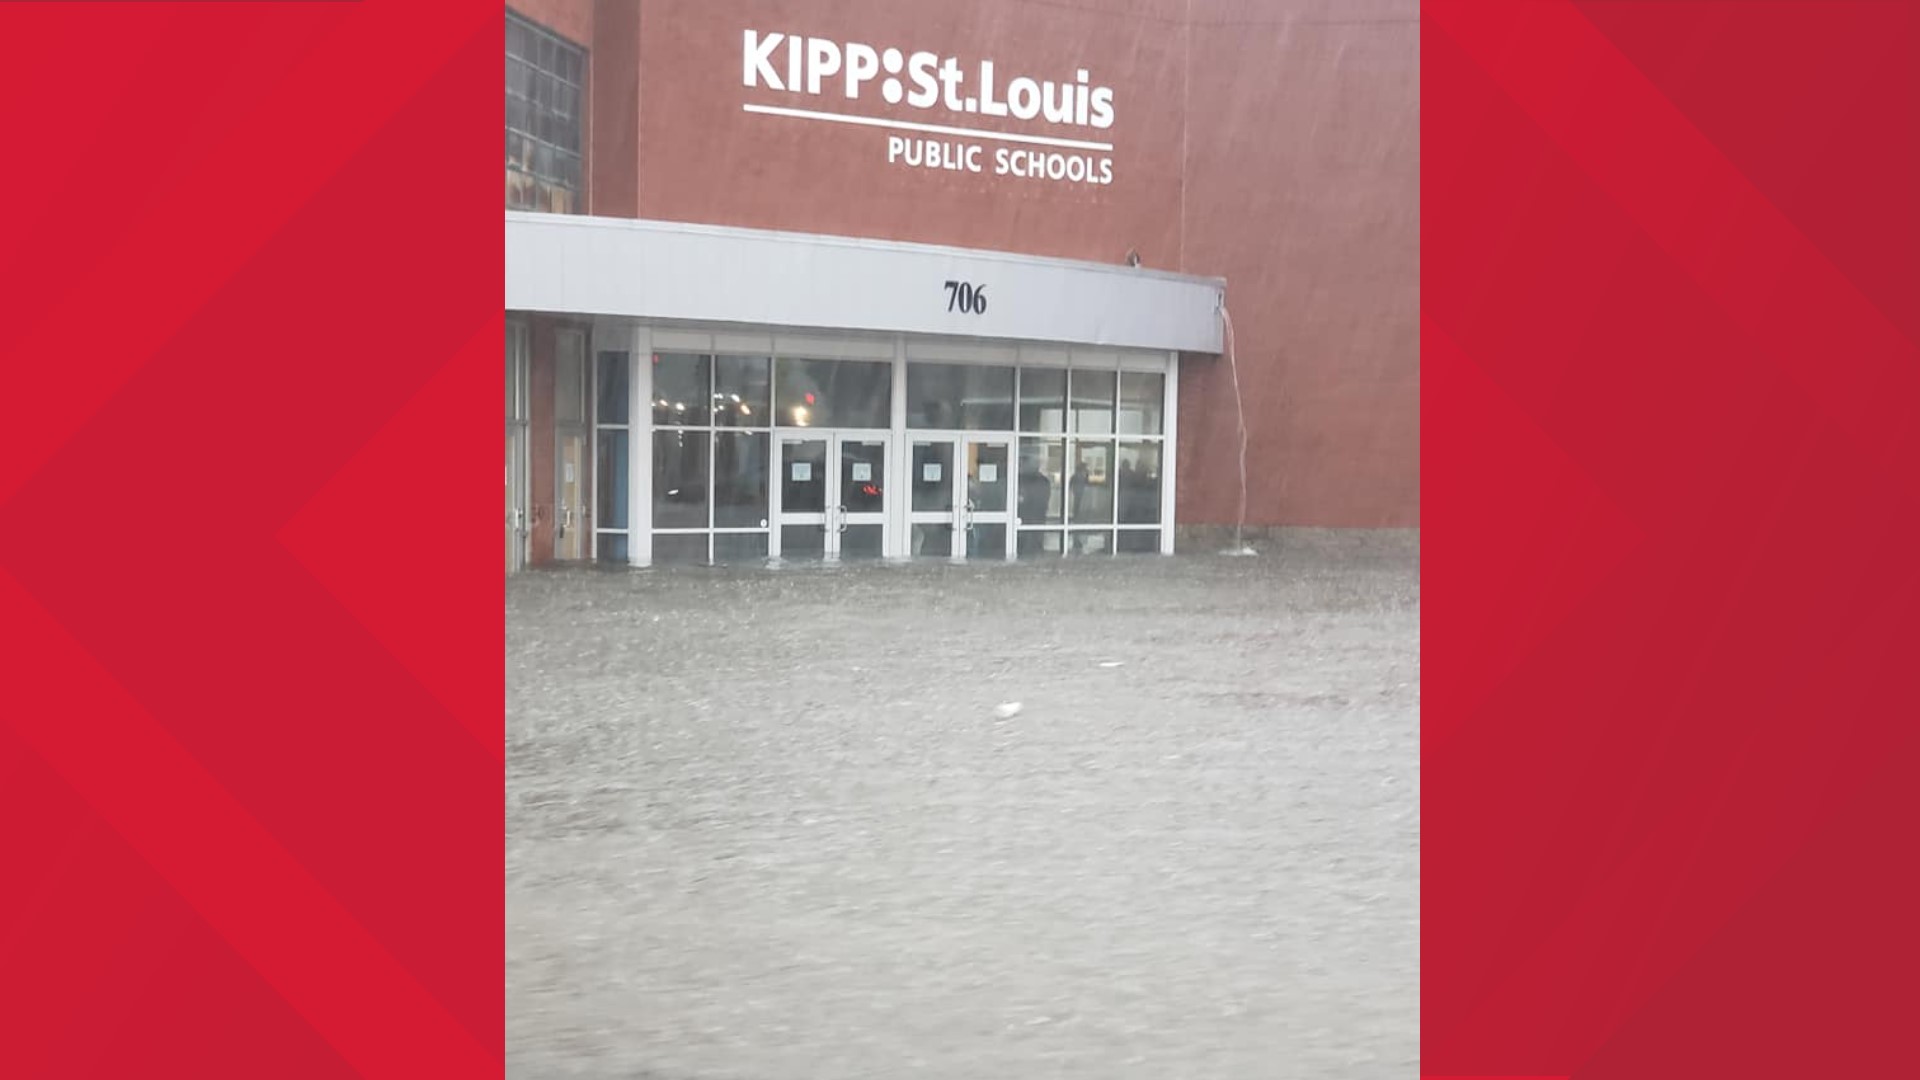 KIPP St. Louis High School sent out a message to parents saying, "all students & staff are safe."